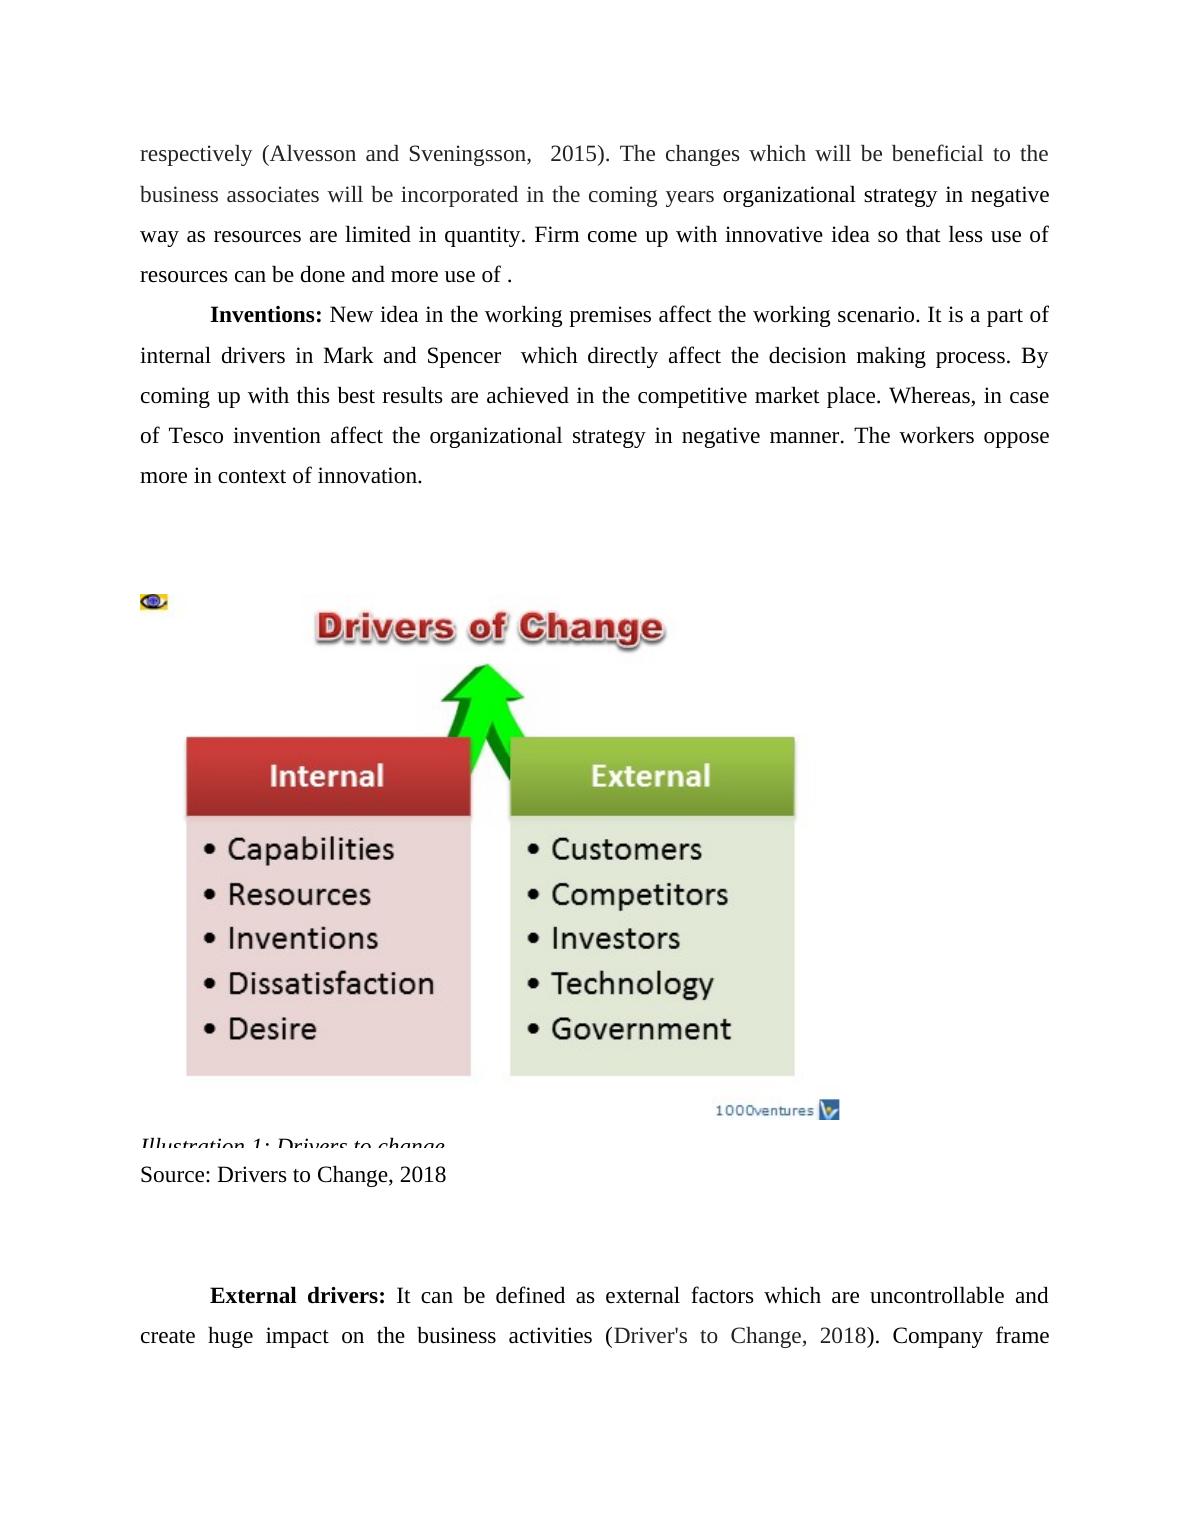 Understanding and Leading Change Drivers_4